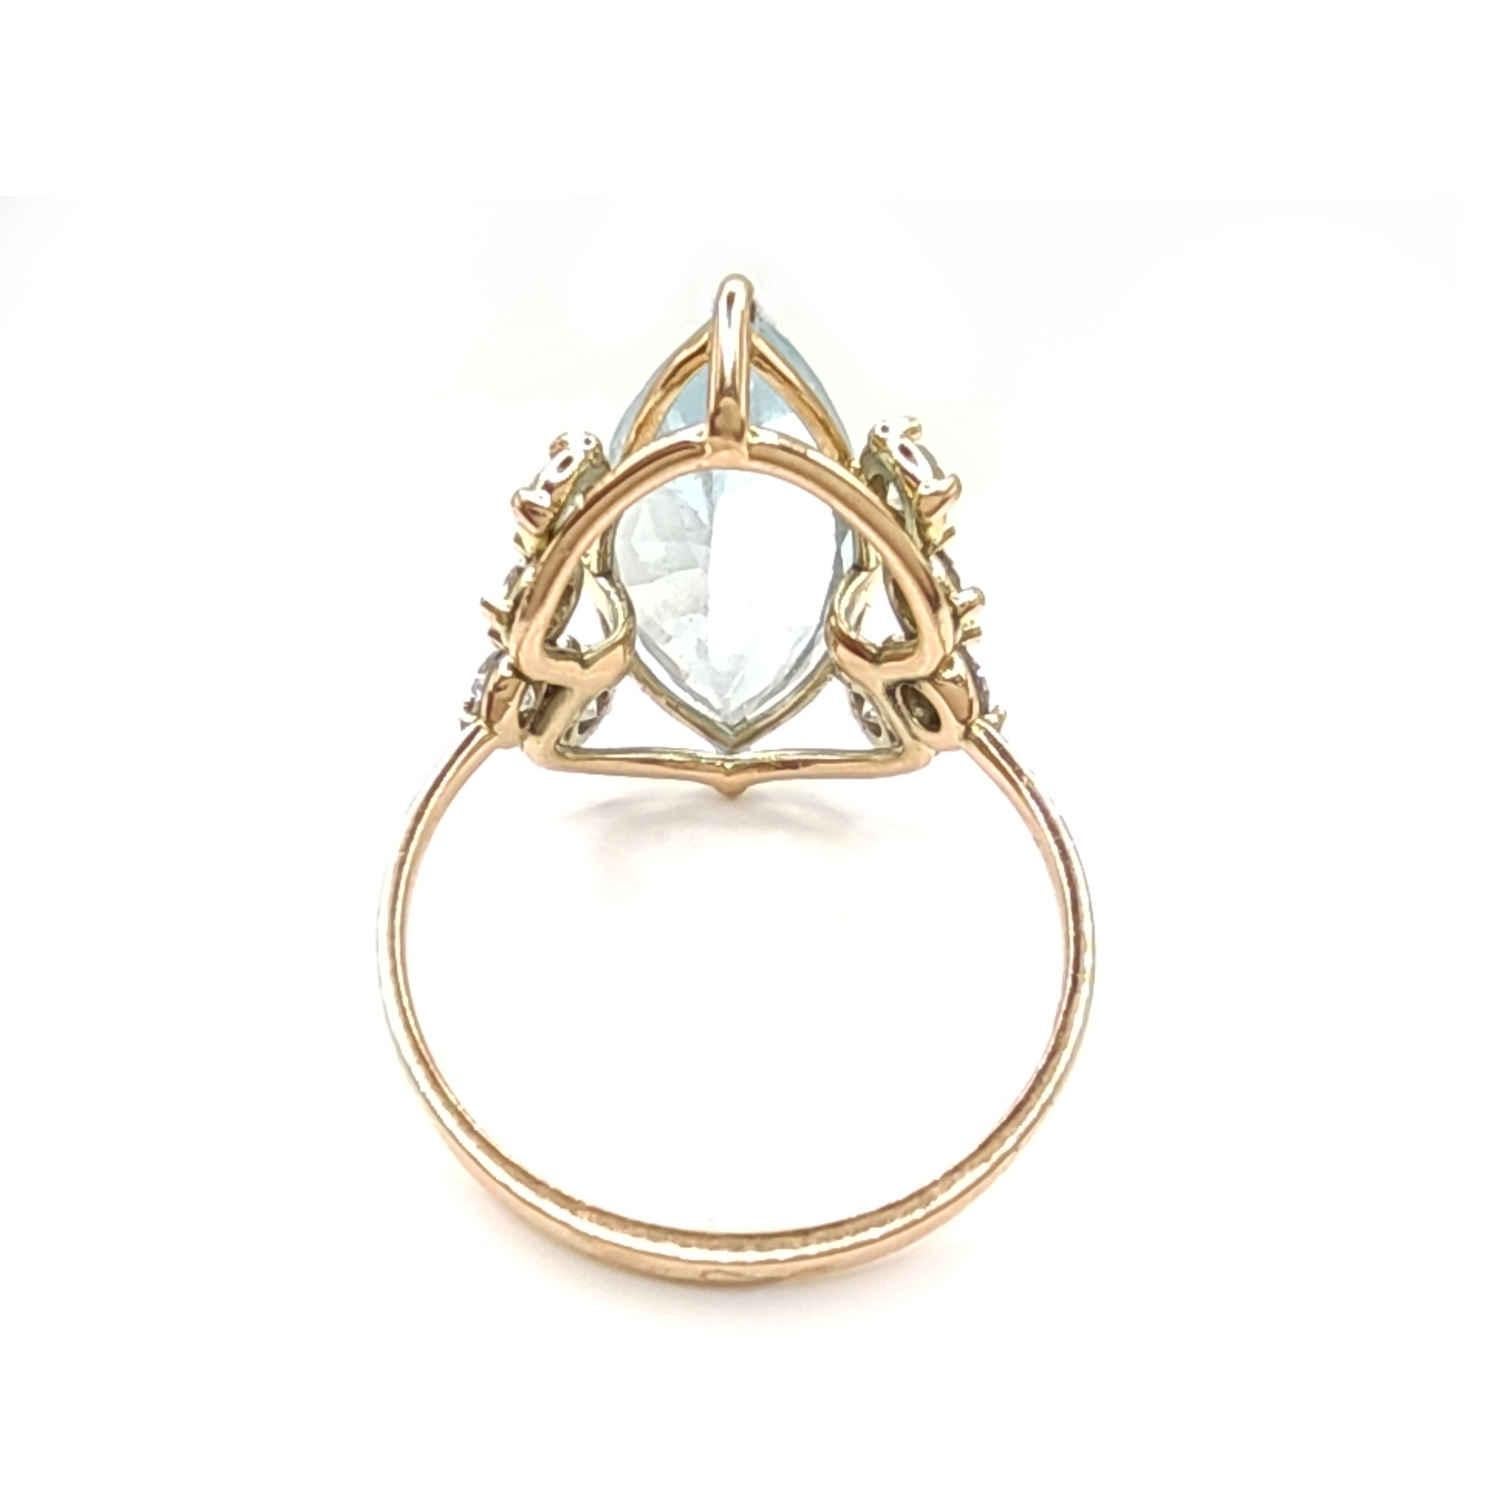 Certified Aquamarine Diamond Cocktail Ring in 14K Gold - Resizable, Perfect Gift For Sale 3